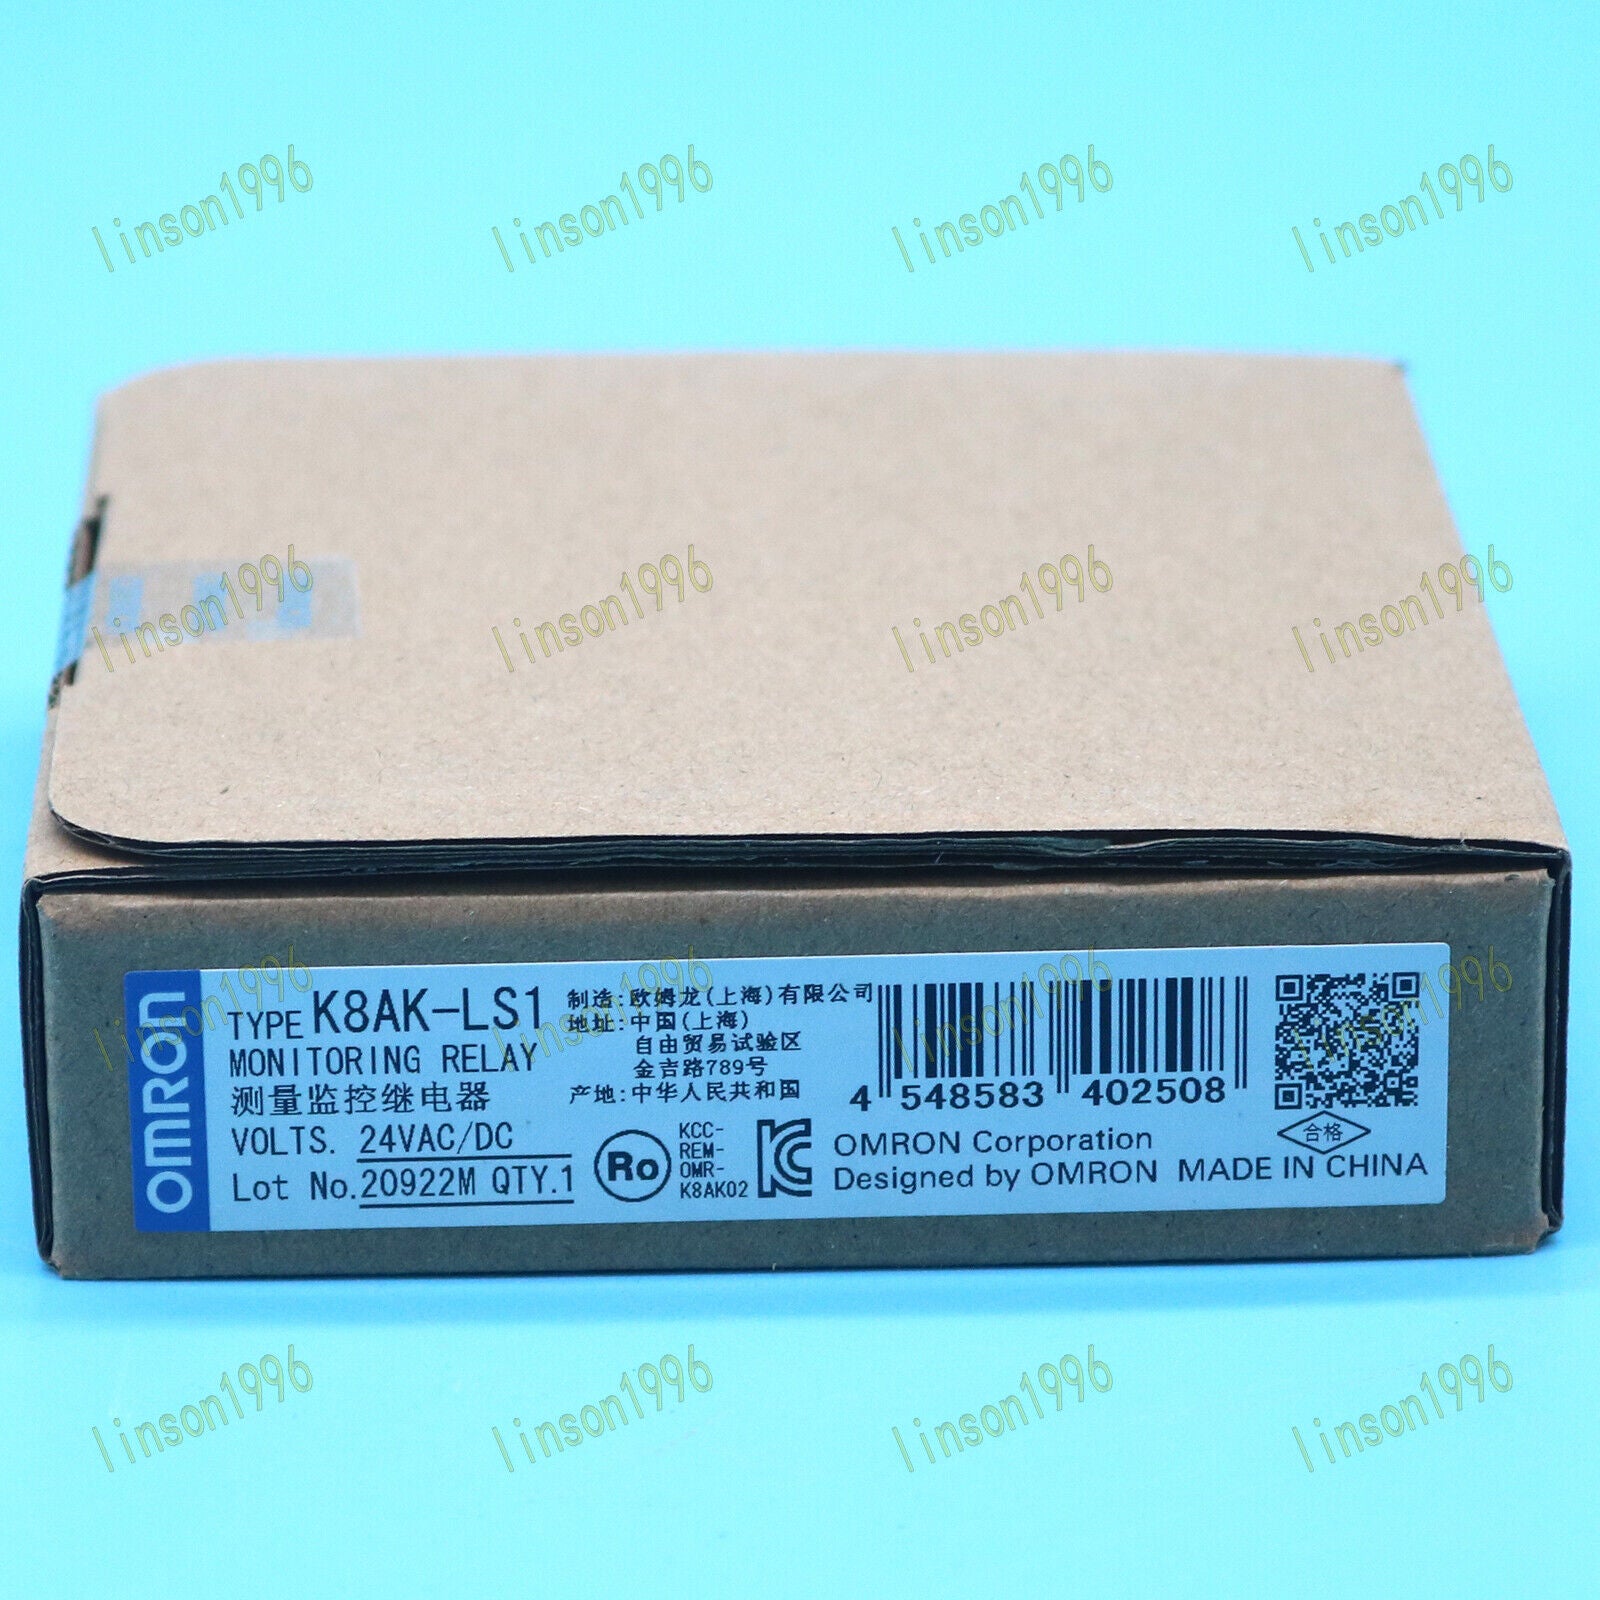 new 1PC  OMRON K8AK-LS1 24VAC/DC Monitoring Relay Fast Delivery